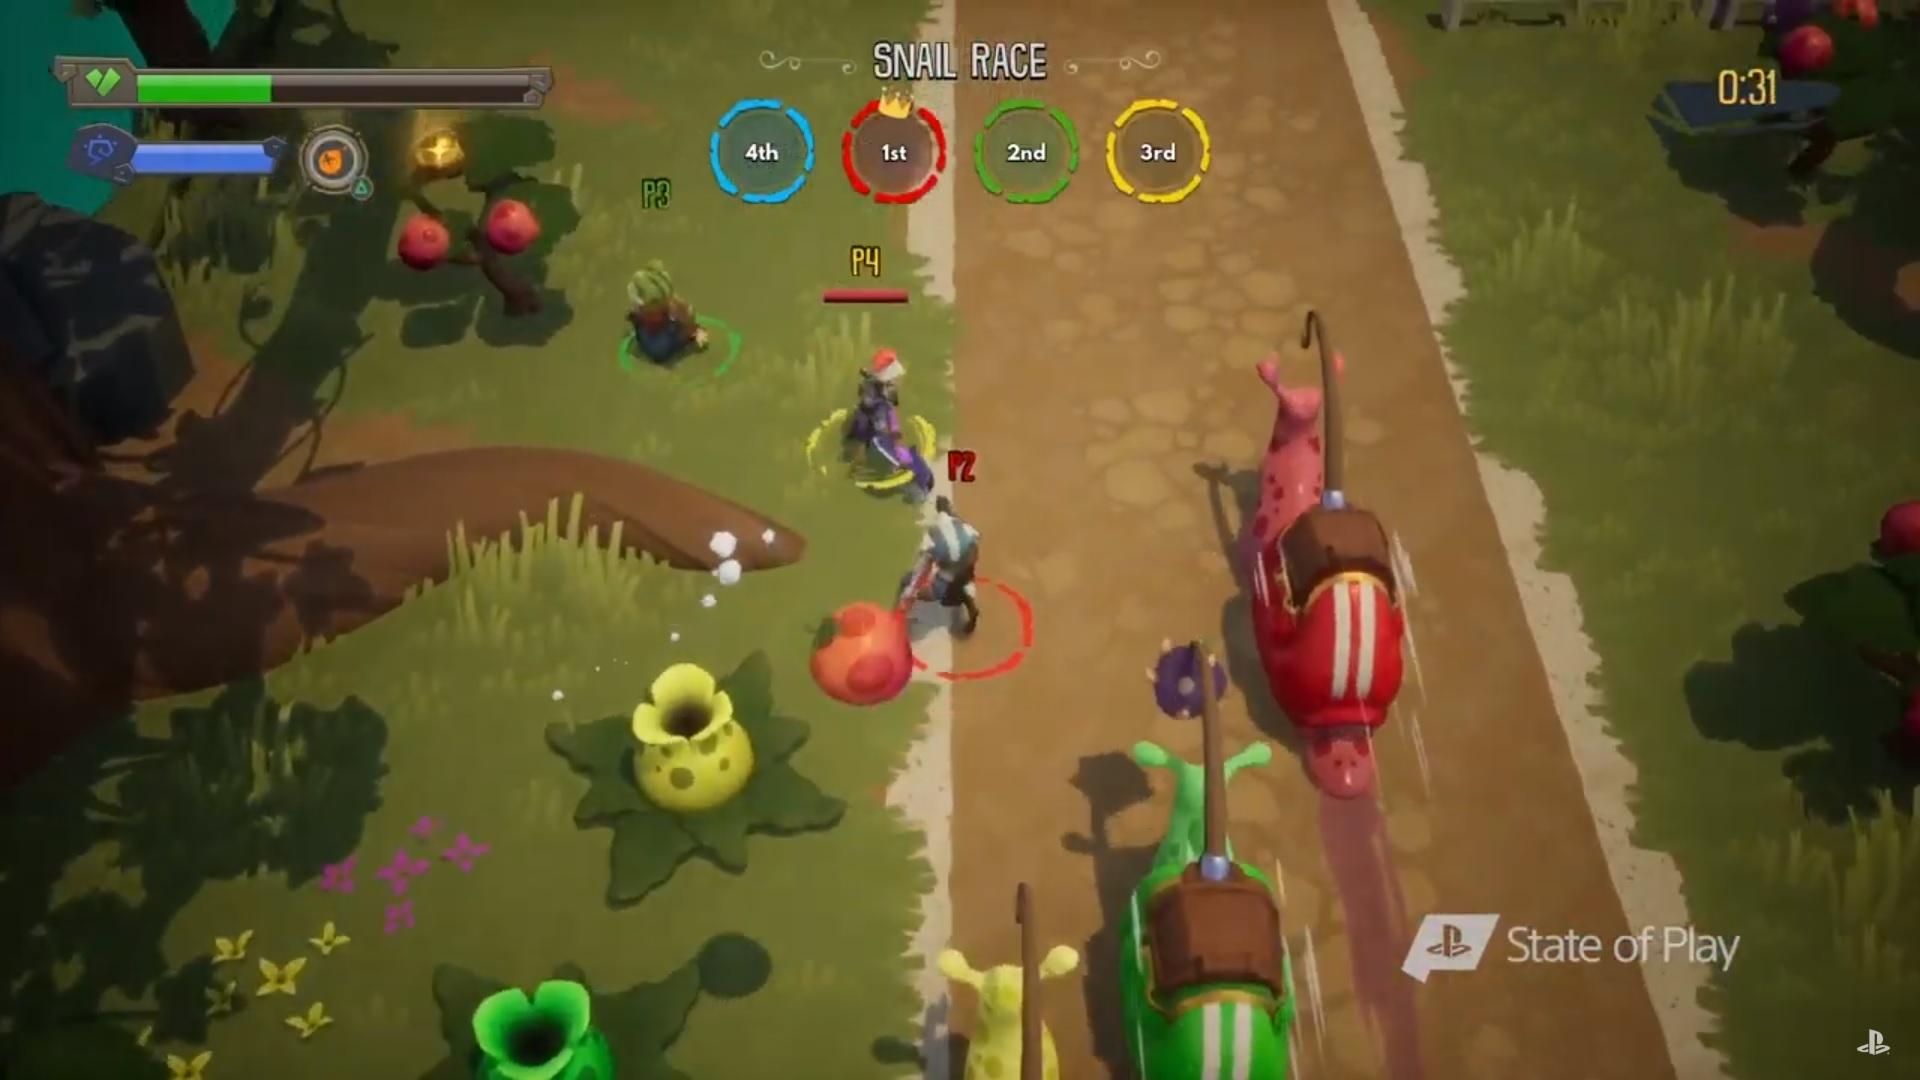 ReadySet Heroes Mixes Hack N Slash Combat With Online Competition